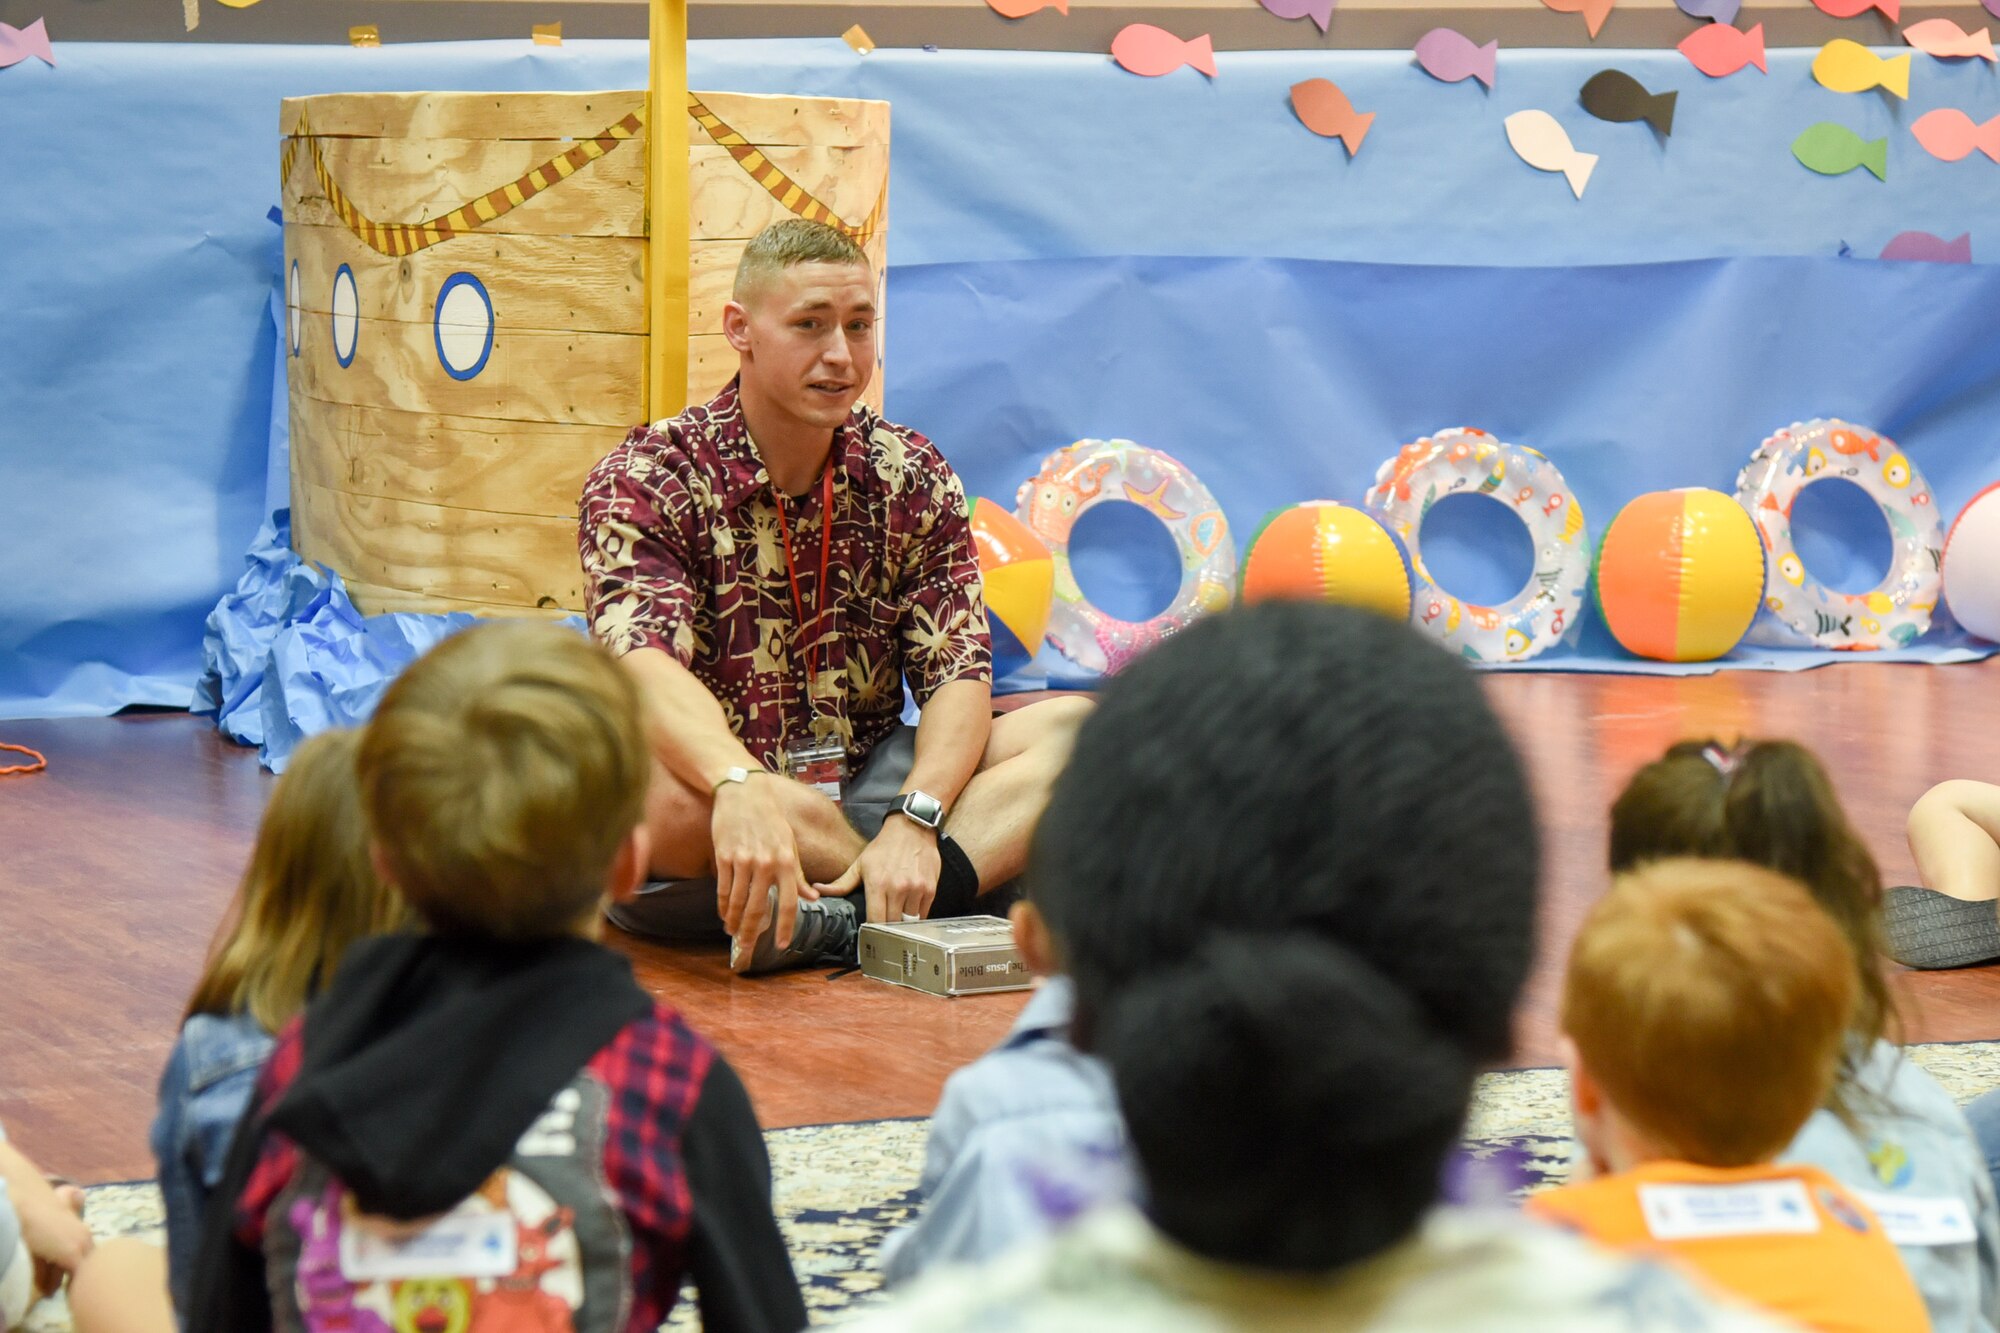 Senior Airman Corey Barton, a volunteer at Vacation Bible School, teaches a Bible lesson to children of command-sponsored families at Al Udeid Air Base, Qatar, May 24, 2018. The two-day event, hosted by the 379th Air Expeditionary Wing Chaplain Corps, integrated biblical lessons and team-building activities. (U.S. Air Force photo by Staff Sgt. Enjoli Saunders)